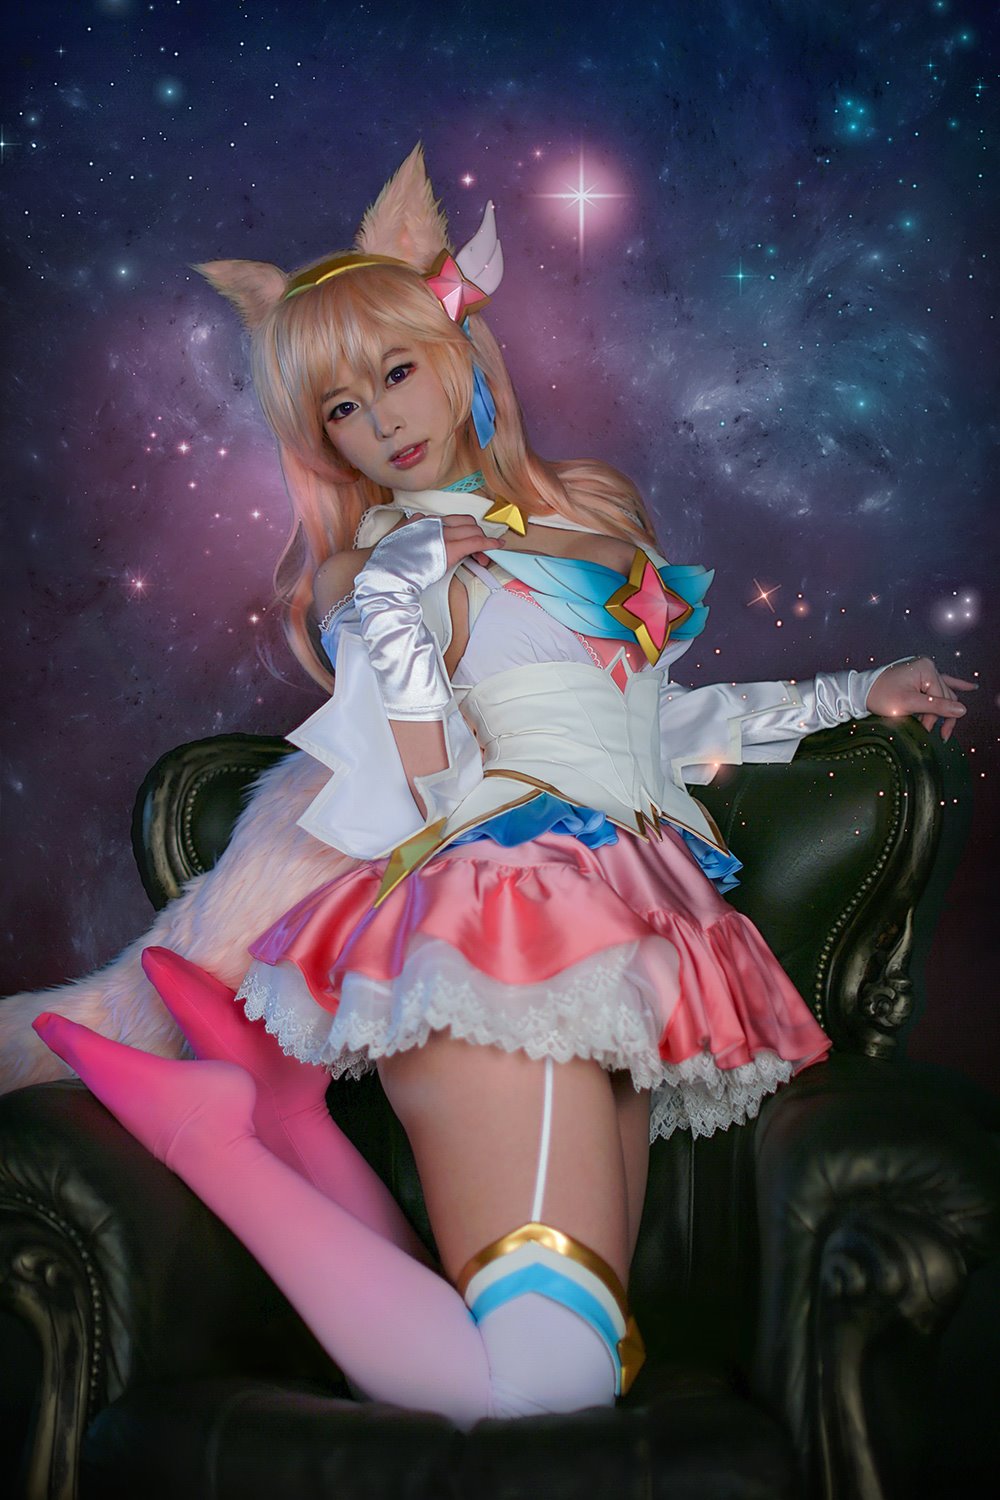 League of Legends Star Guardian Ahri cosplay Spiral Cats